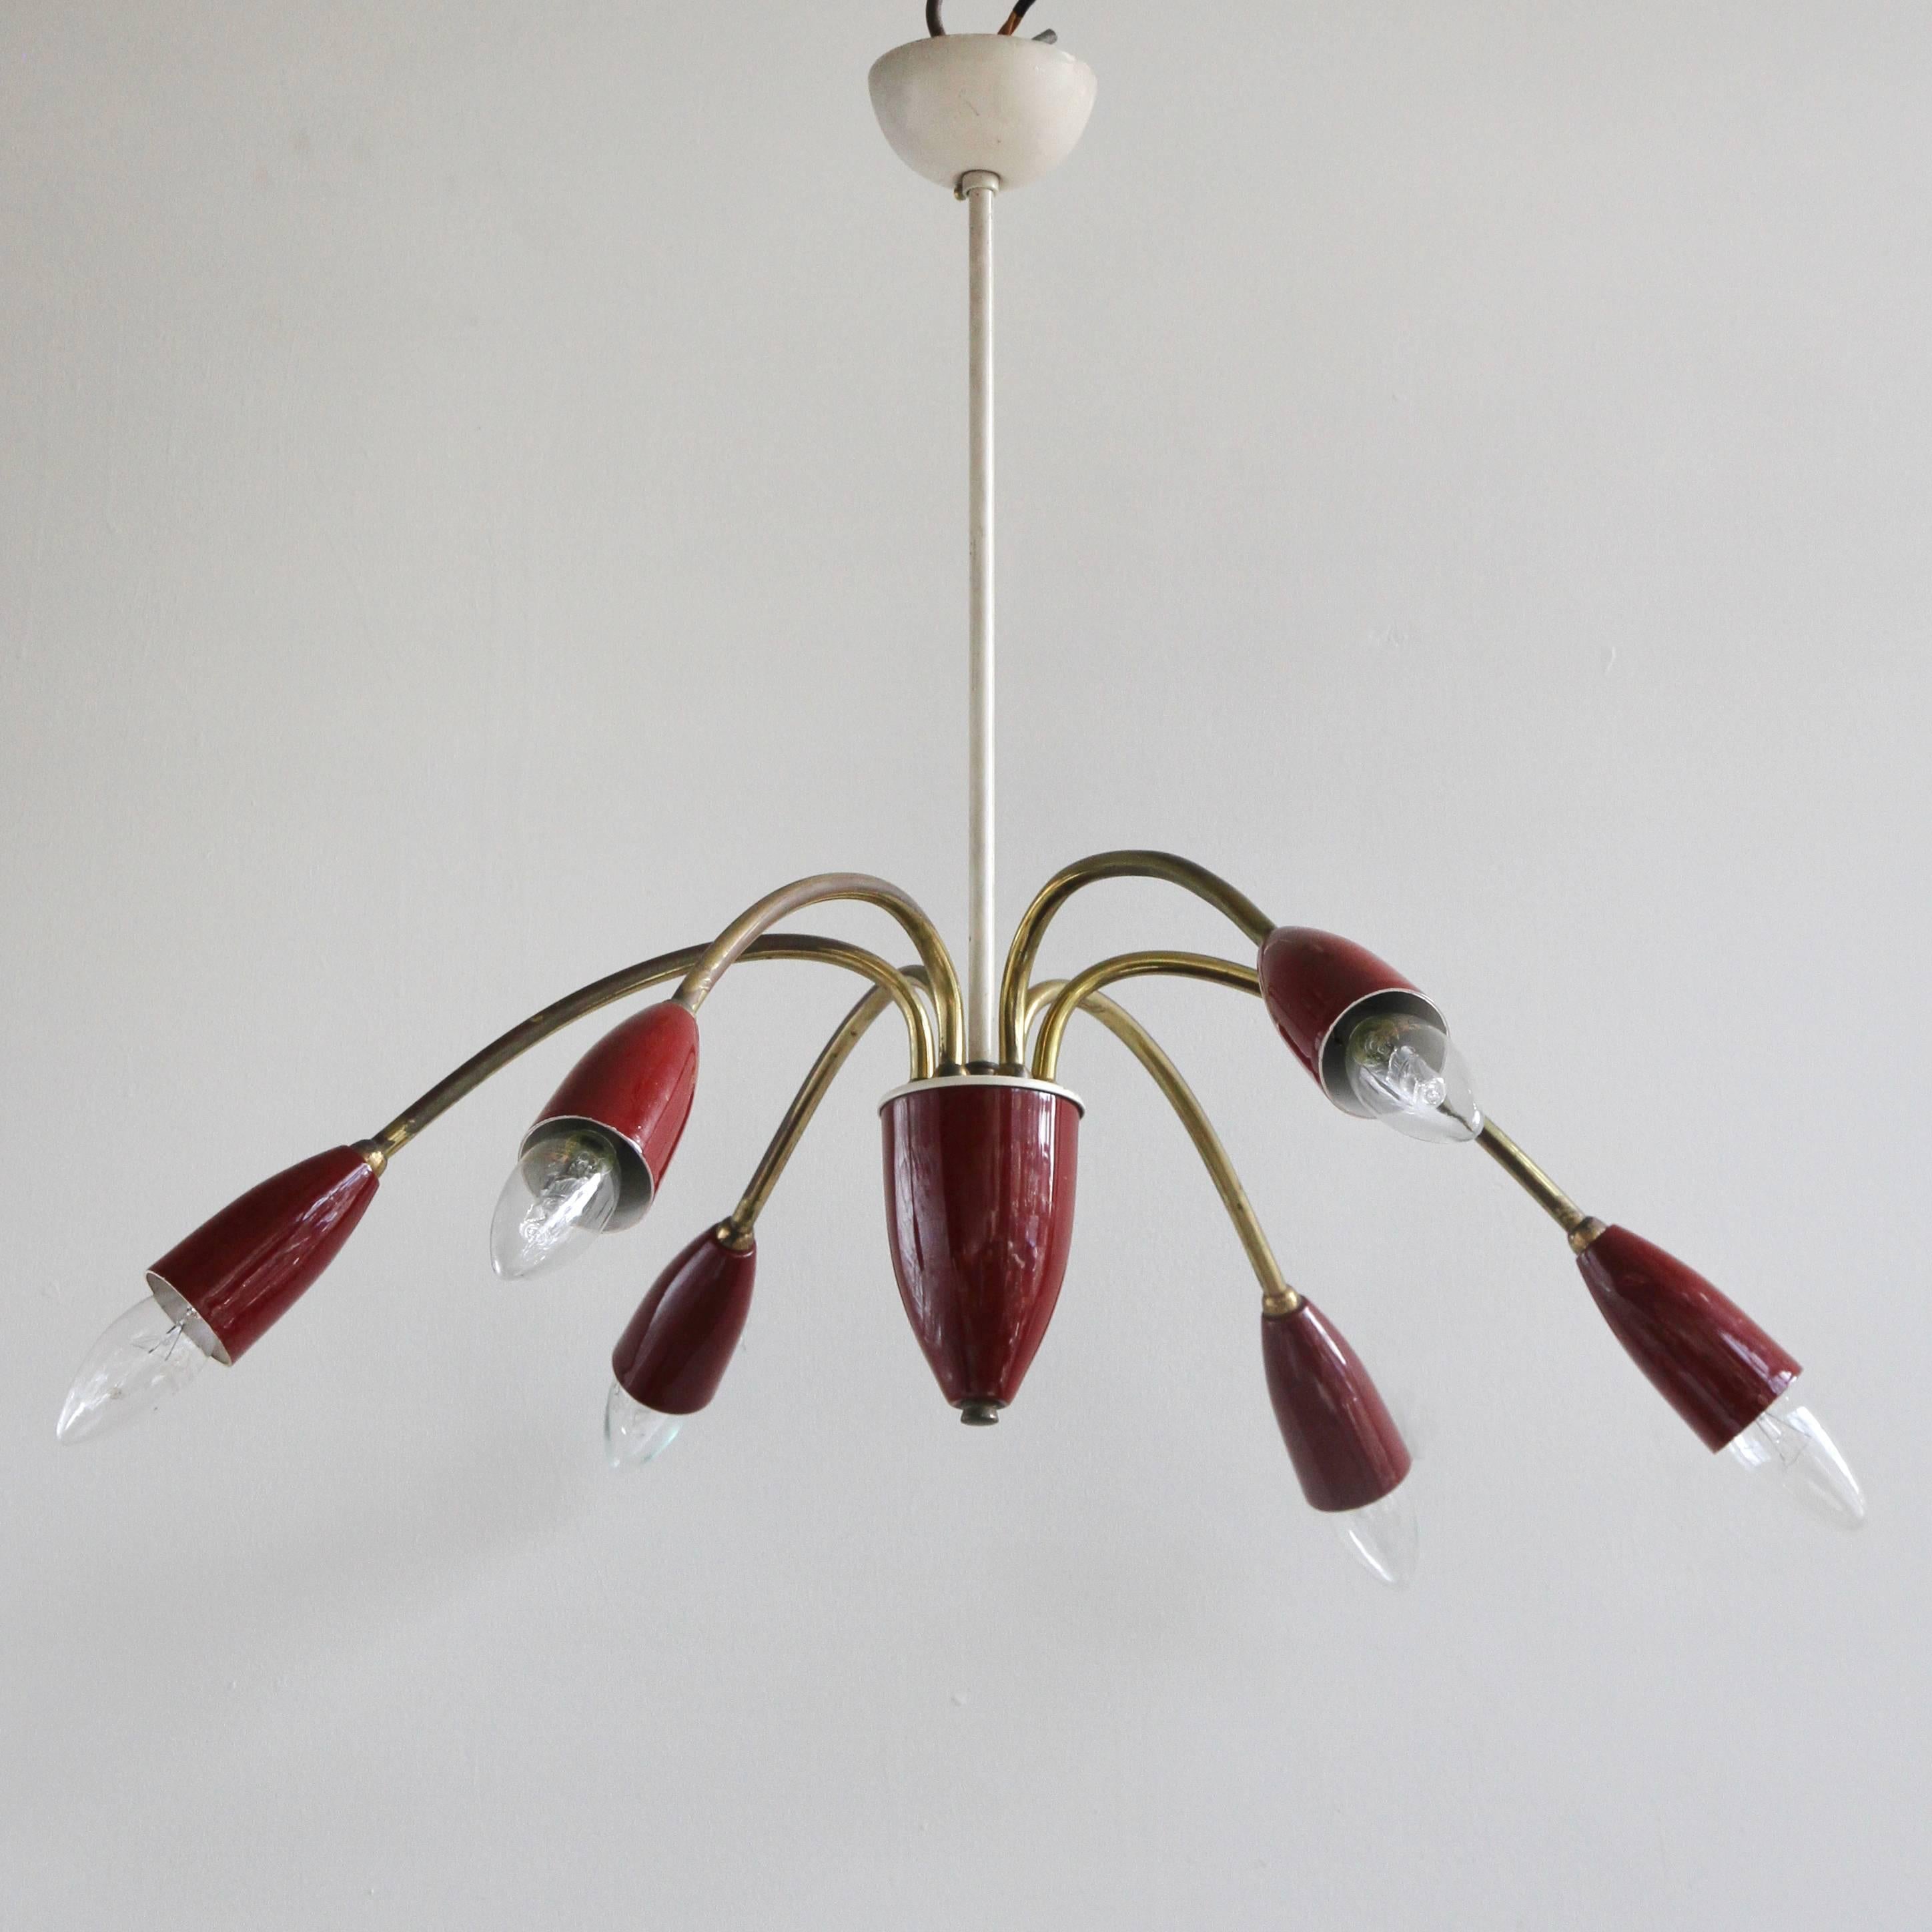 Midcentury French six-arm brass and burgundy pendant. Pendant uses six SES, E14 lamps.